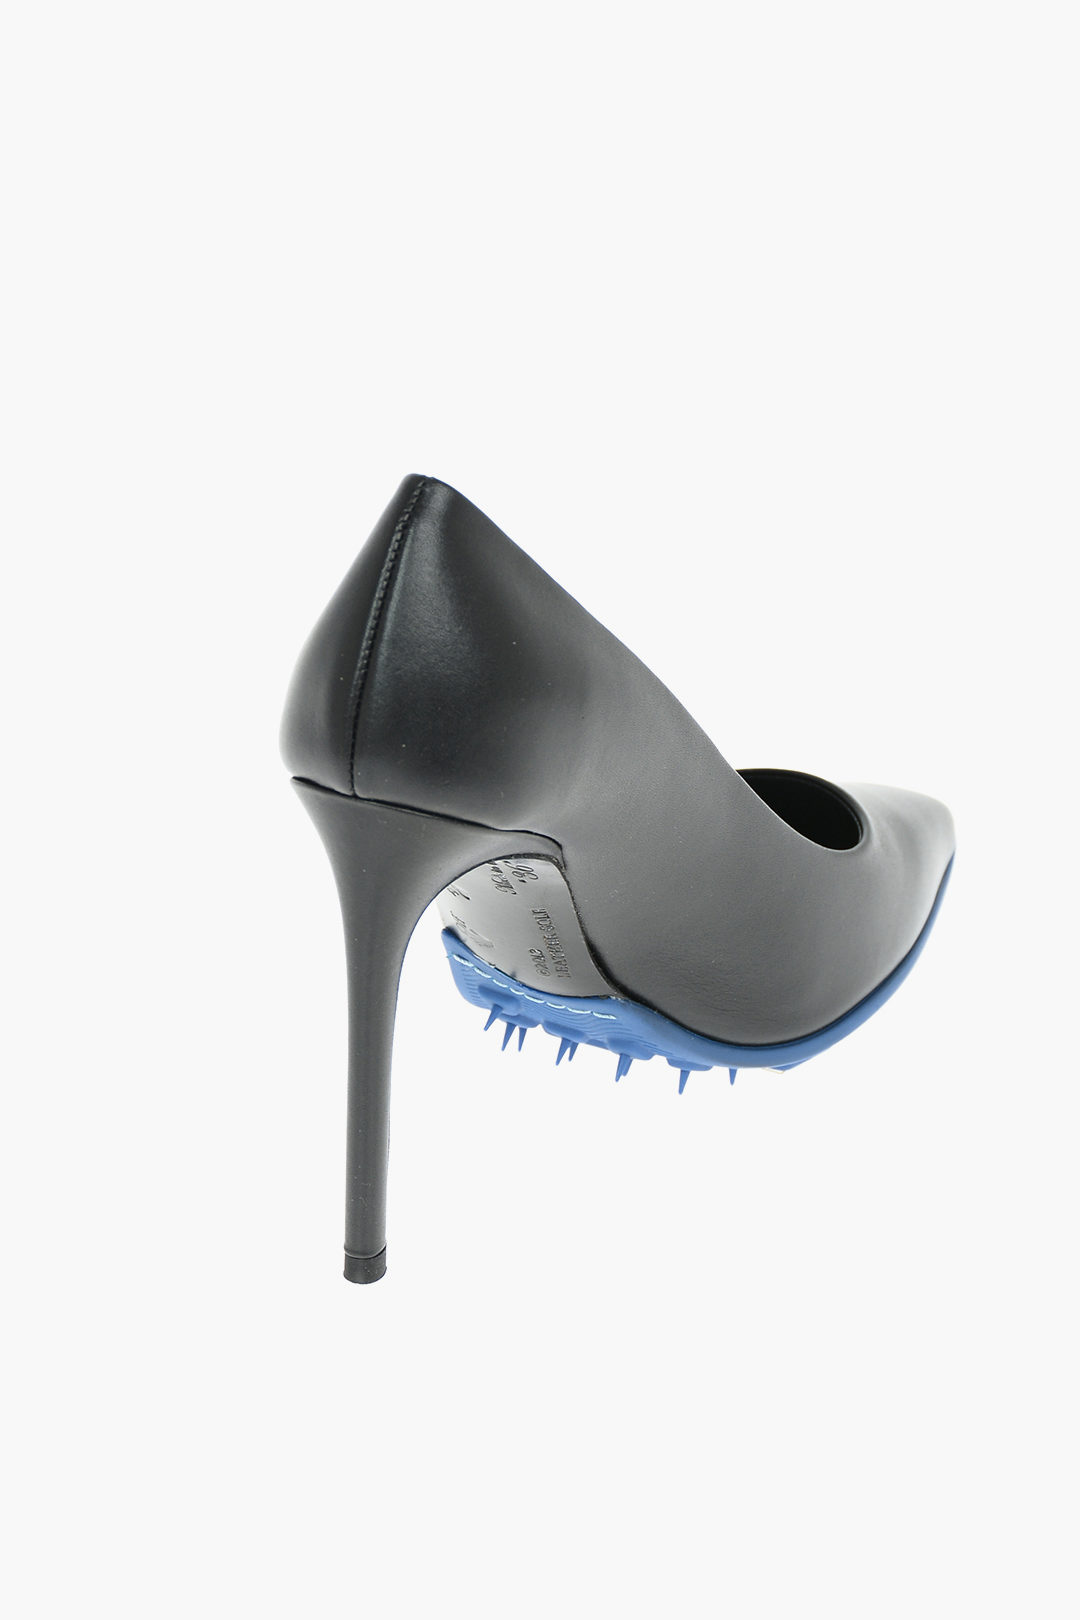 Spike on Black High Heel Shoes Stock Photo - Image of silver, object:  39660354